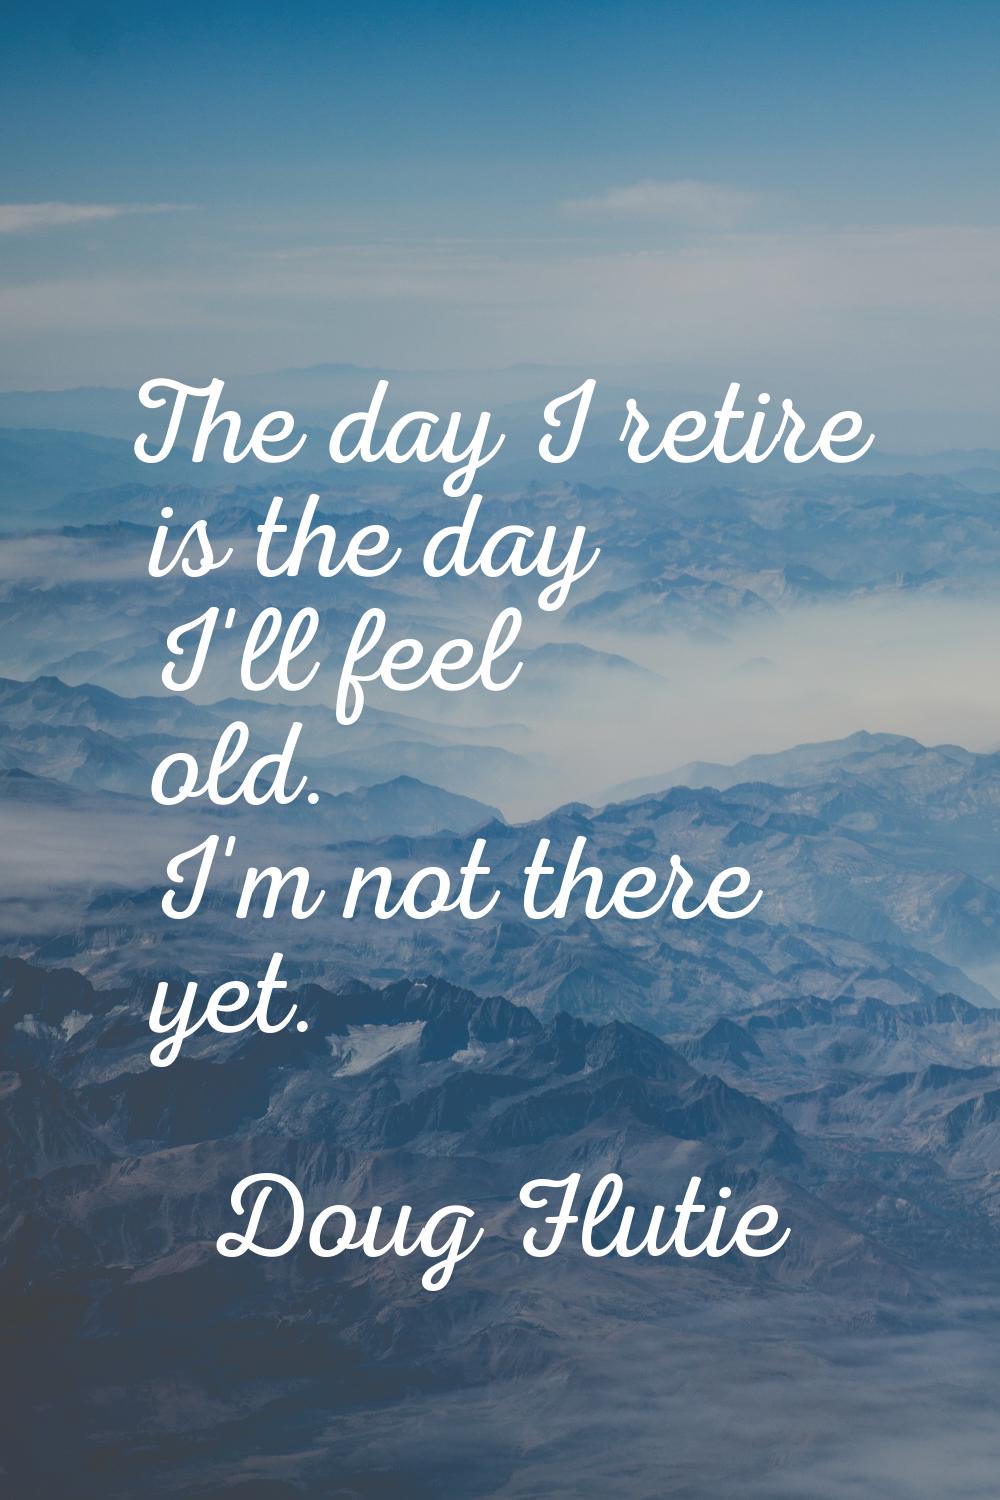 The day I retire is the day I'll feel old. I'm not there yet.